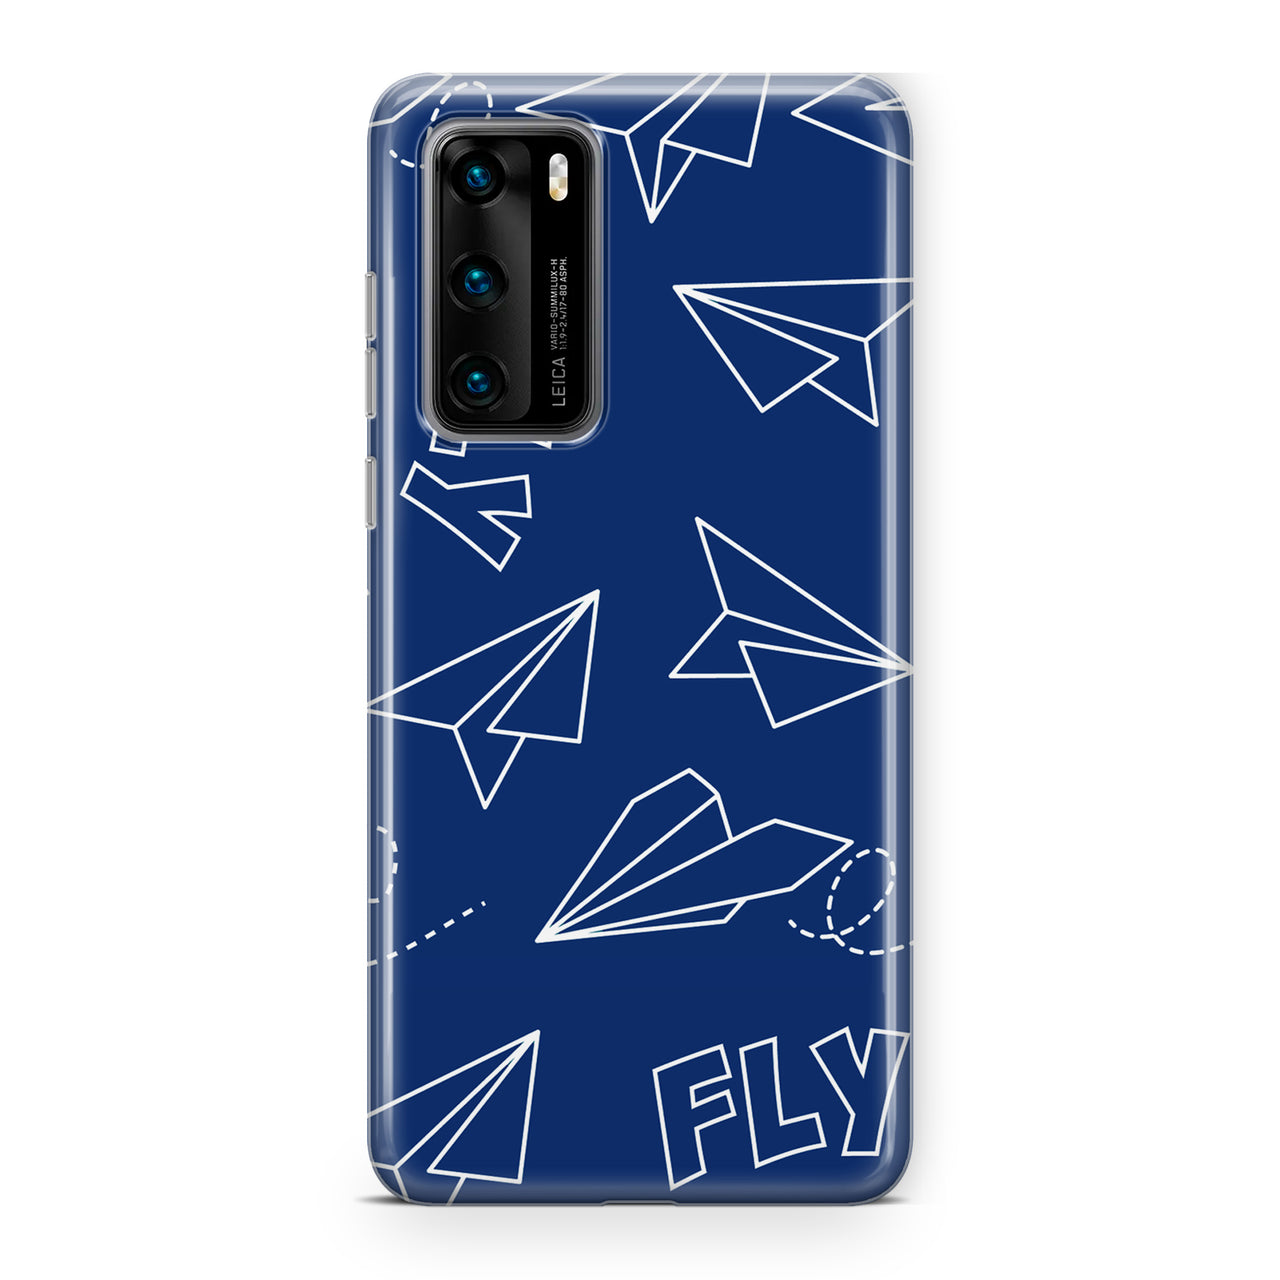 Paper Airplane & Fly-Blue Designed Huawei Cases